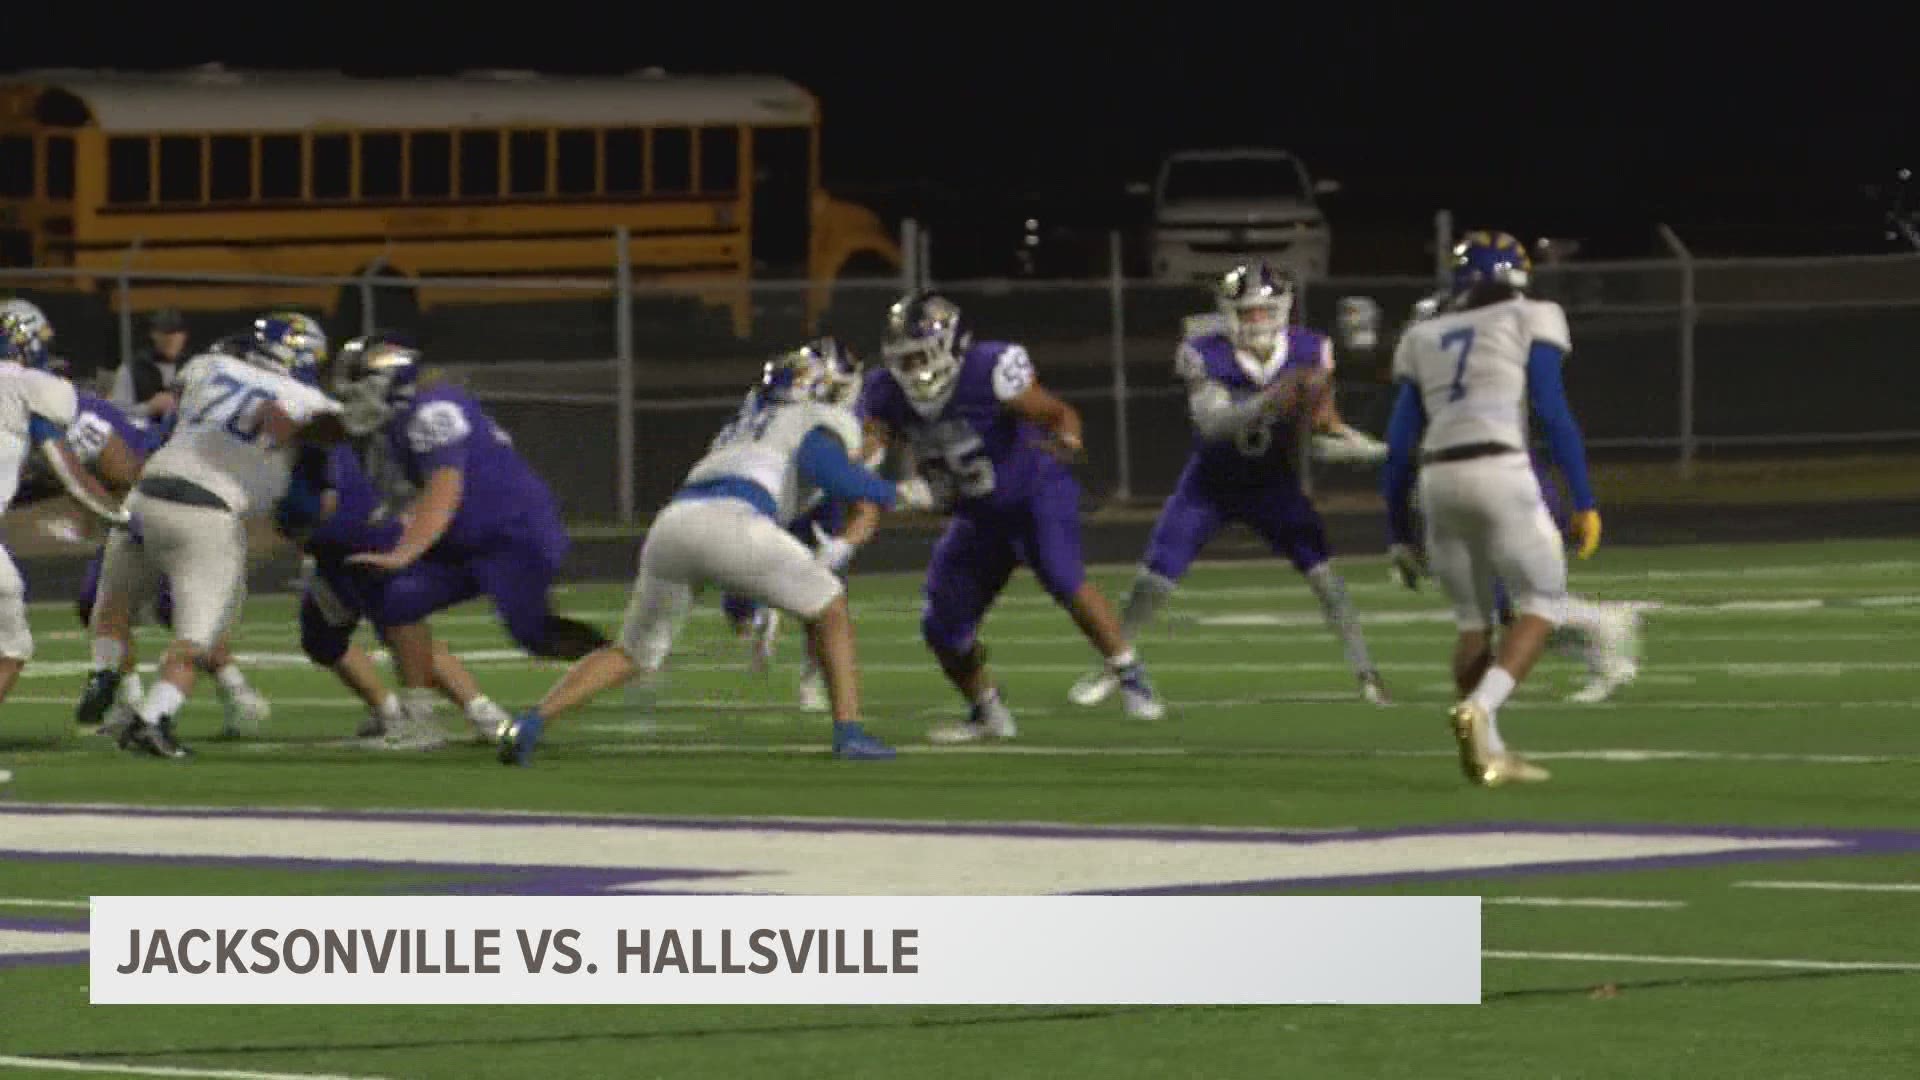 The Jacksonville Indians traveled to Hallsville to take on the Bobcats in Week 5 of the 5A/6A Texas high school football season.